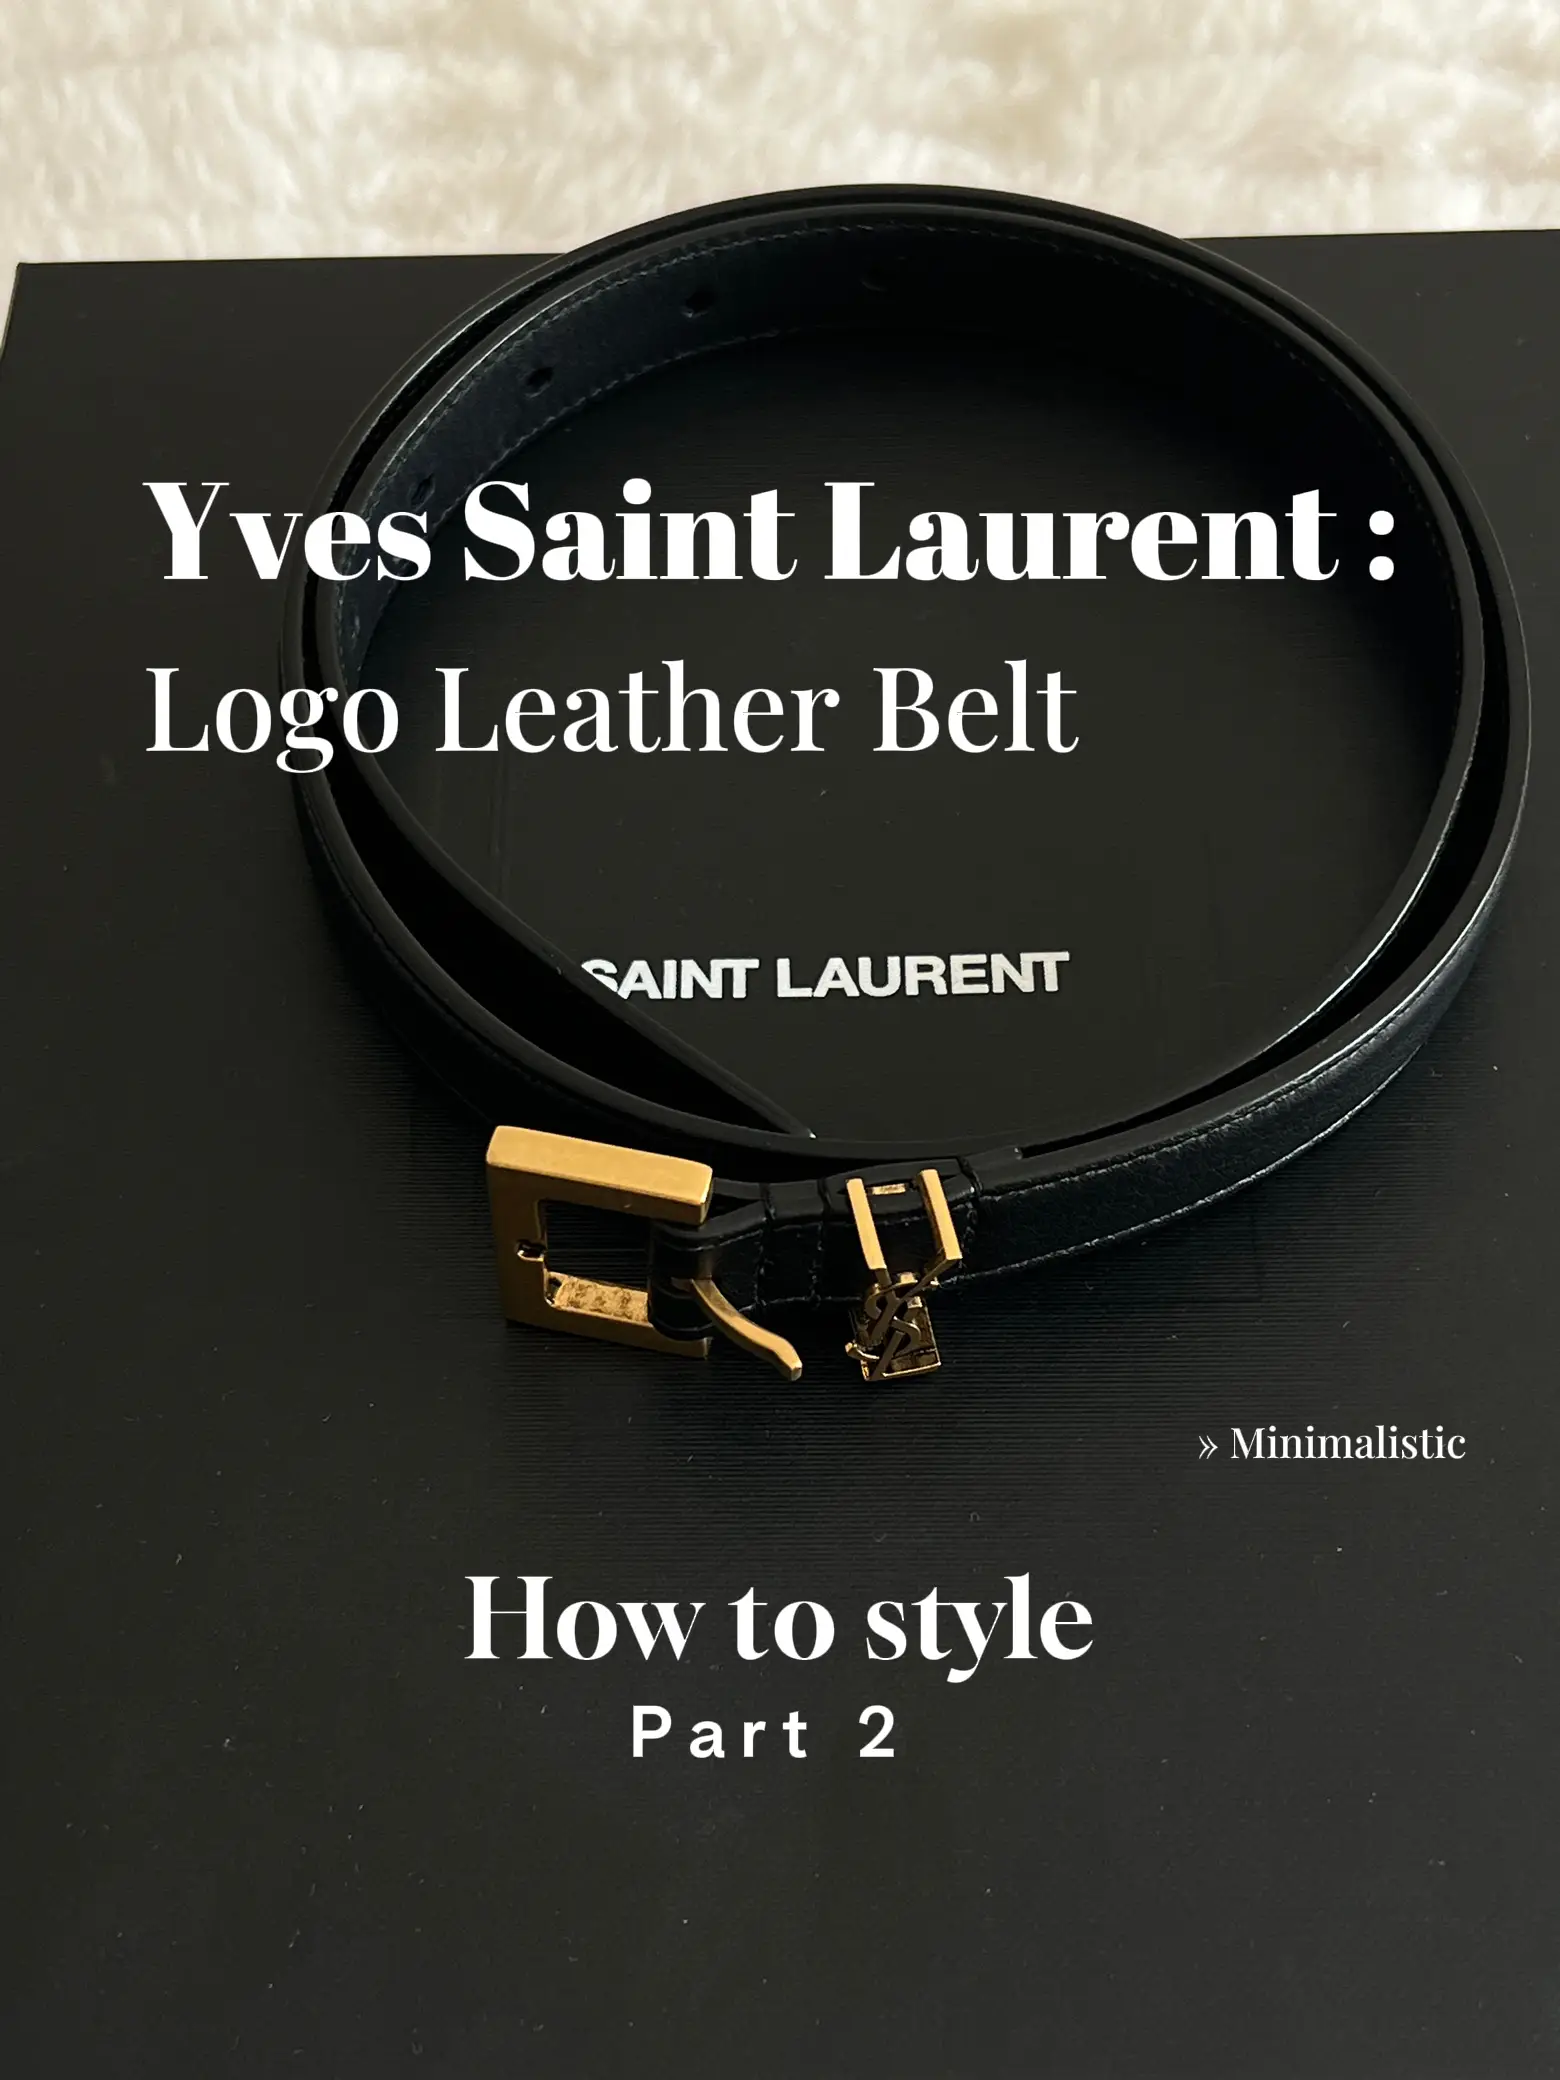 SAINT LAURENT Monogramme leather belt  Classy winter outfits, Outfits,  Brown belt outfit